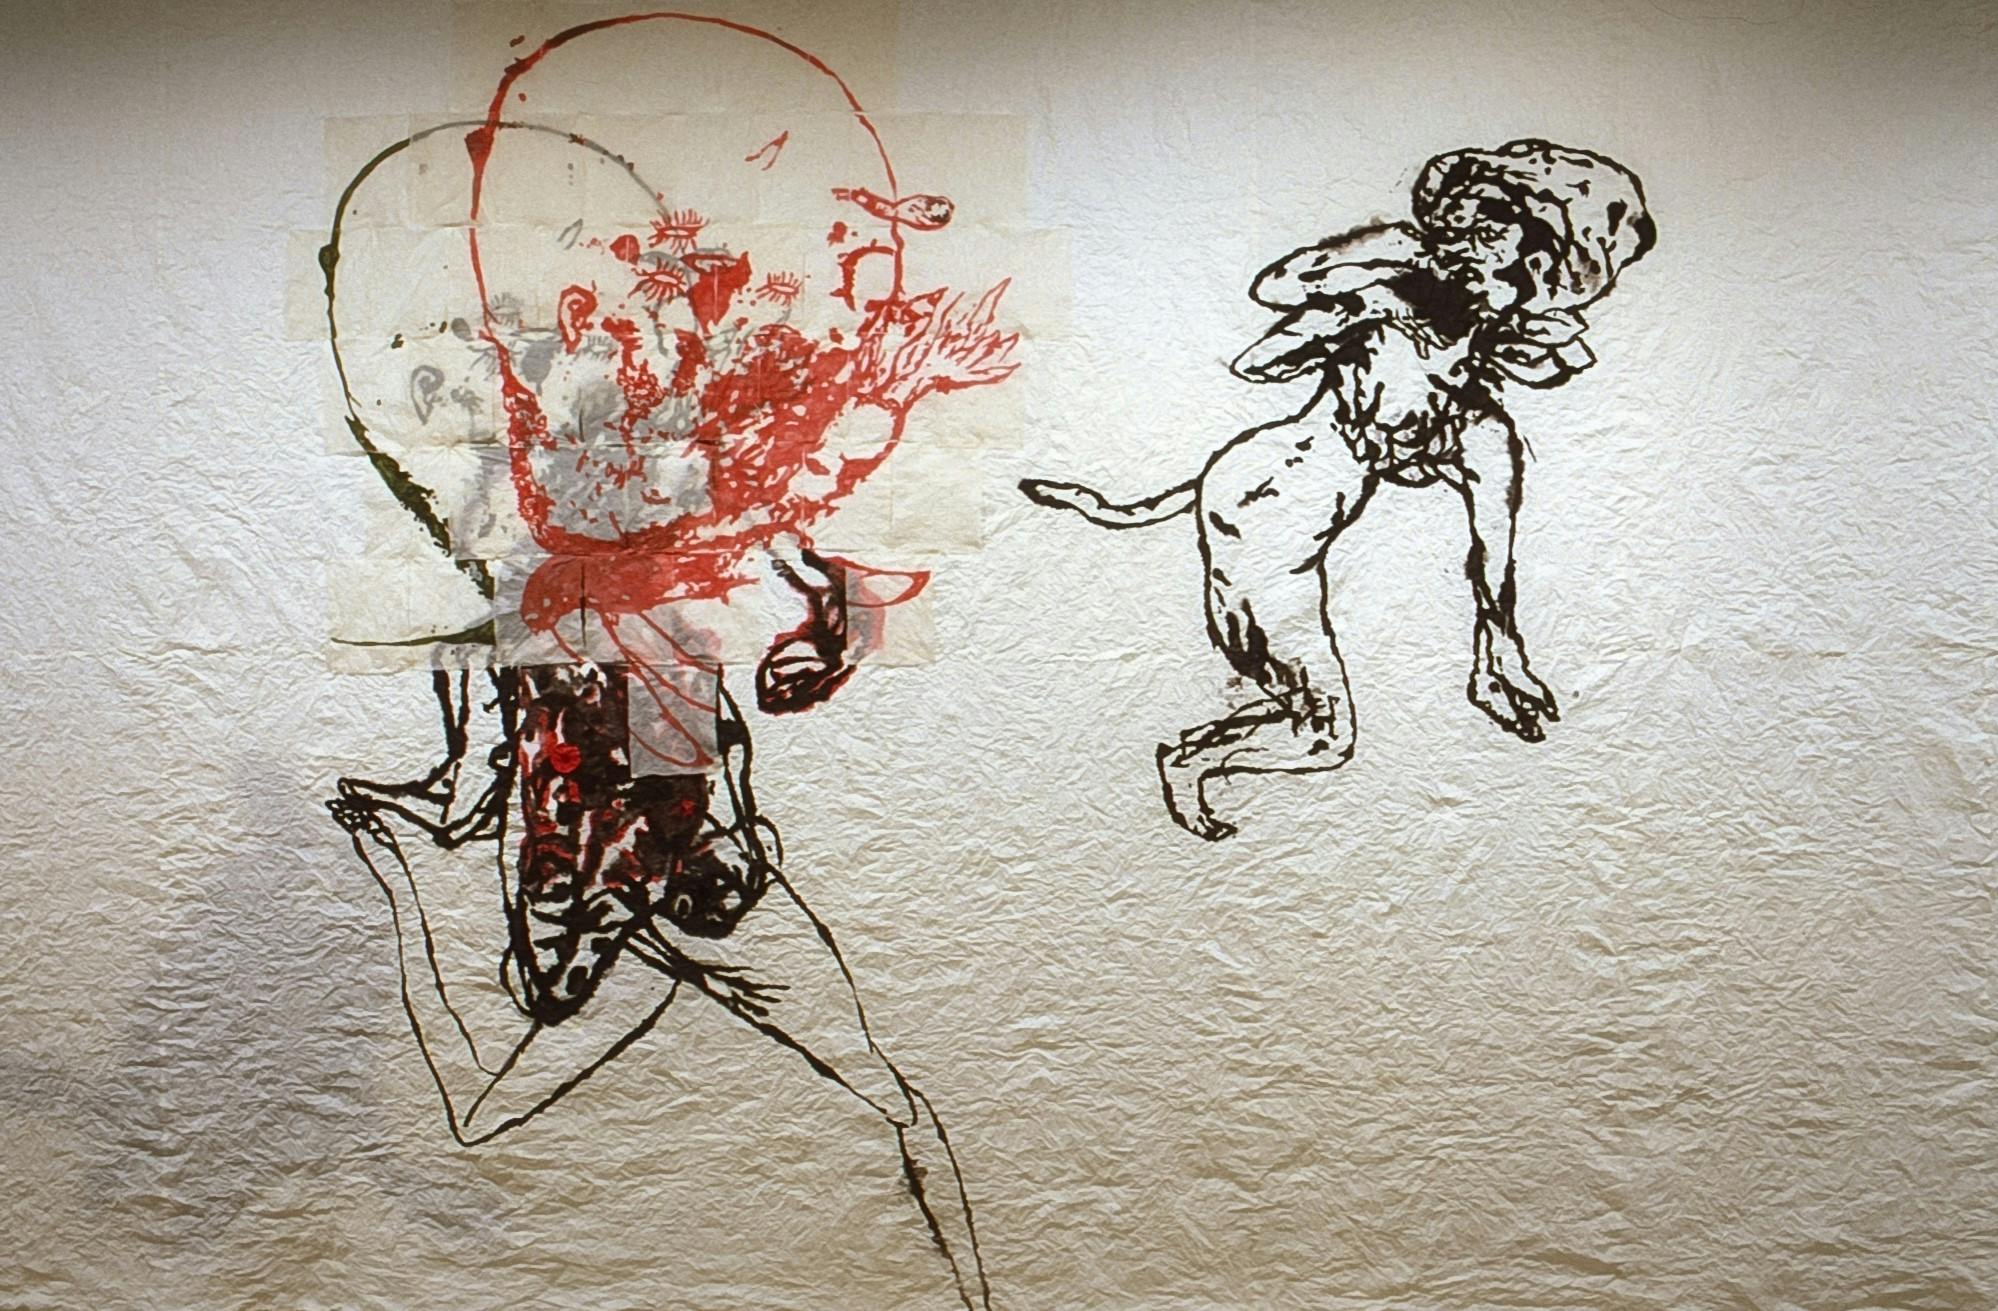 Detail of an artwork by Ed Pien. Two mythic figures, half humans and half undefinable animals, are drawin on paper. Red and black inks were used to draw these figures. 